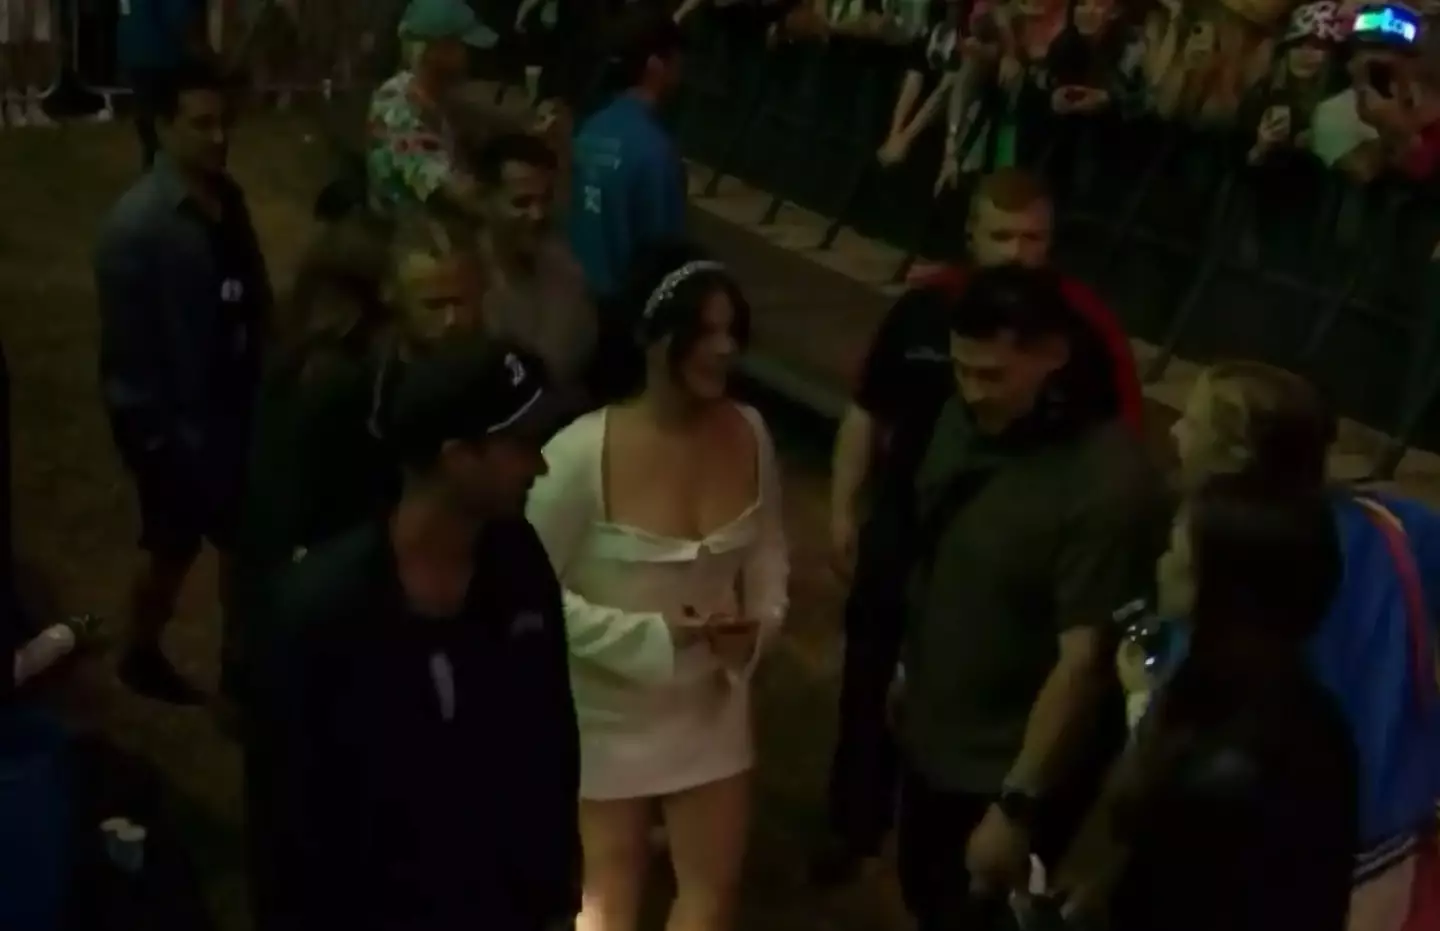 The biggest names at Glastonbury can't stay on too late and security had to escort her away.